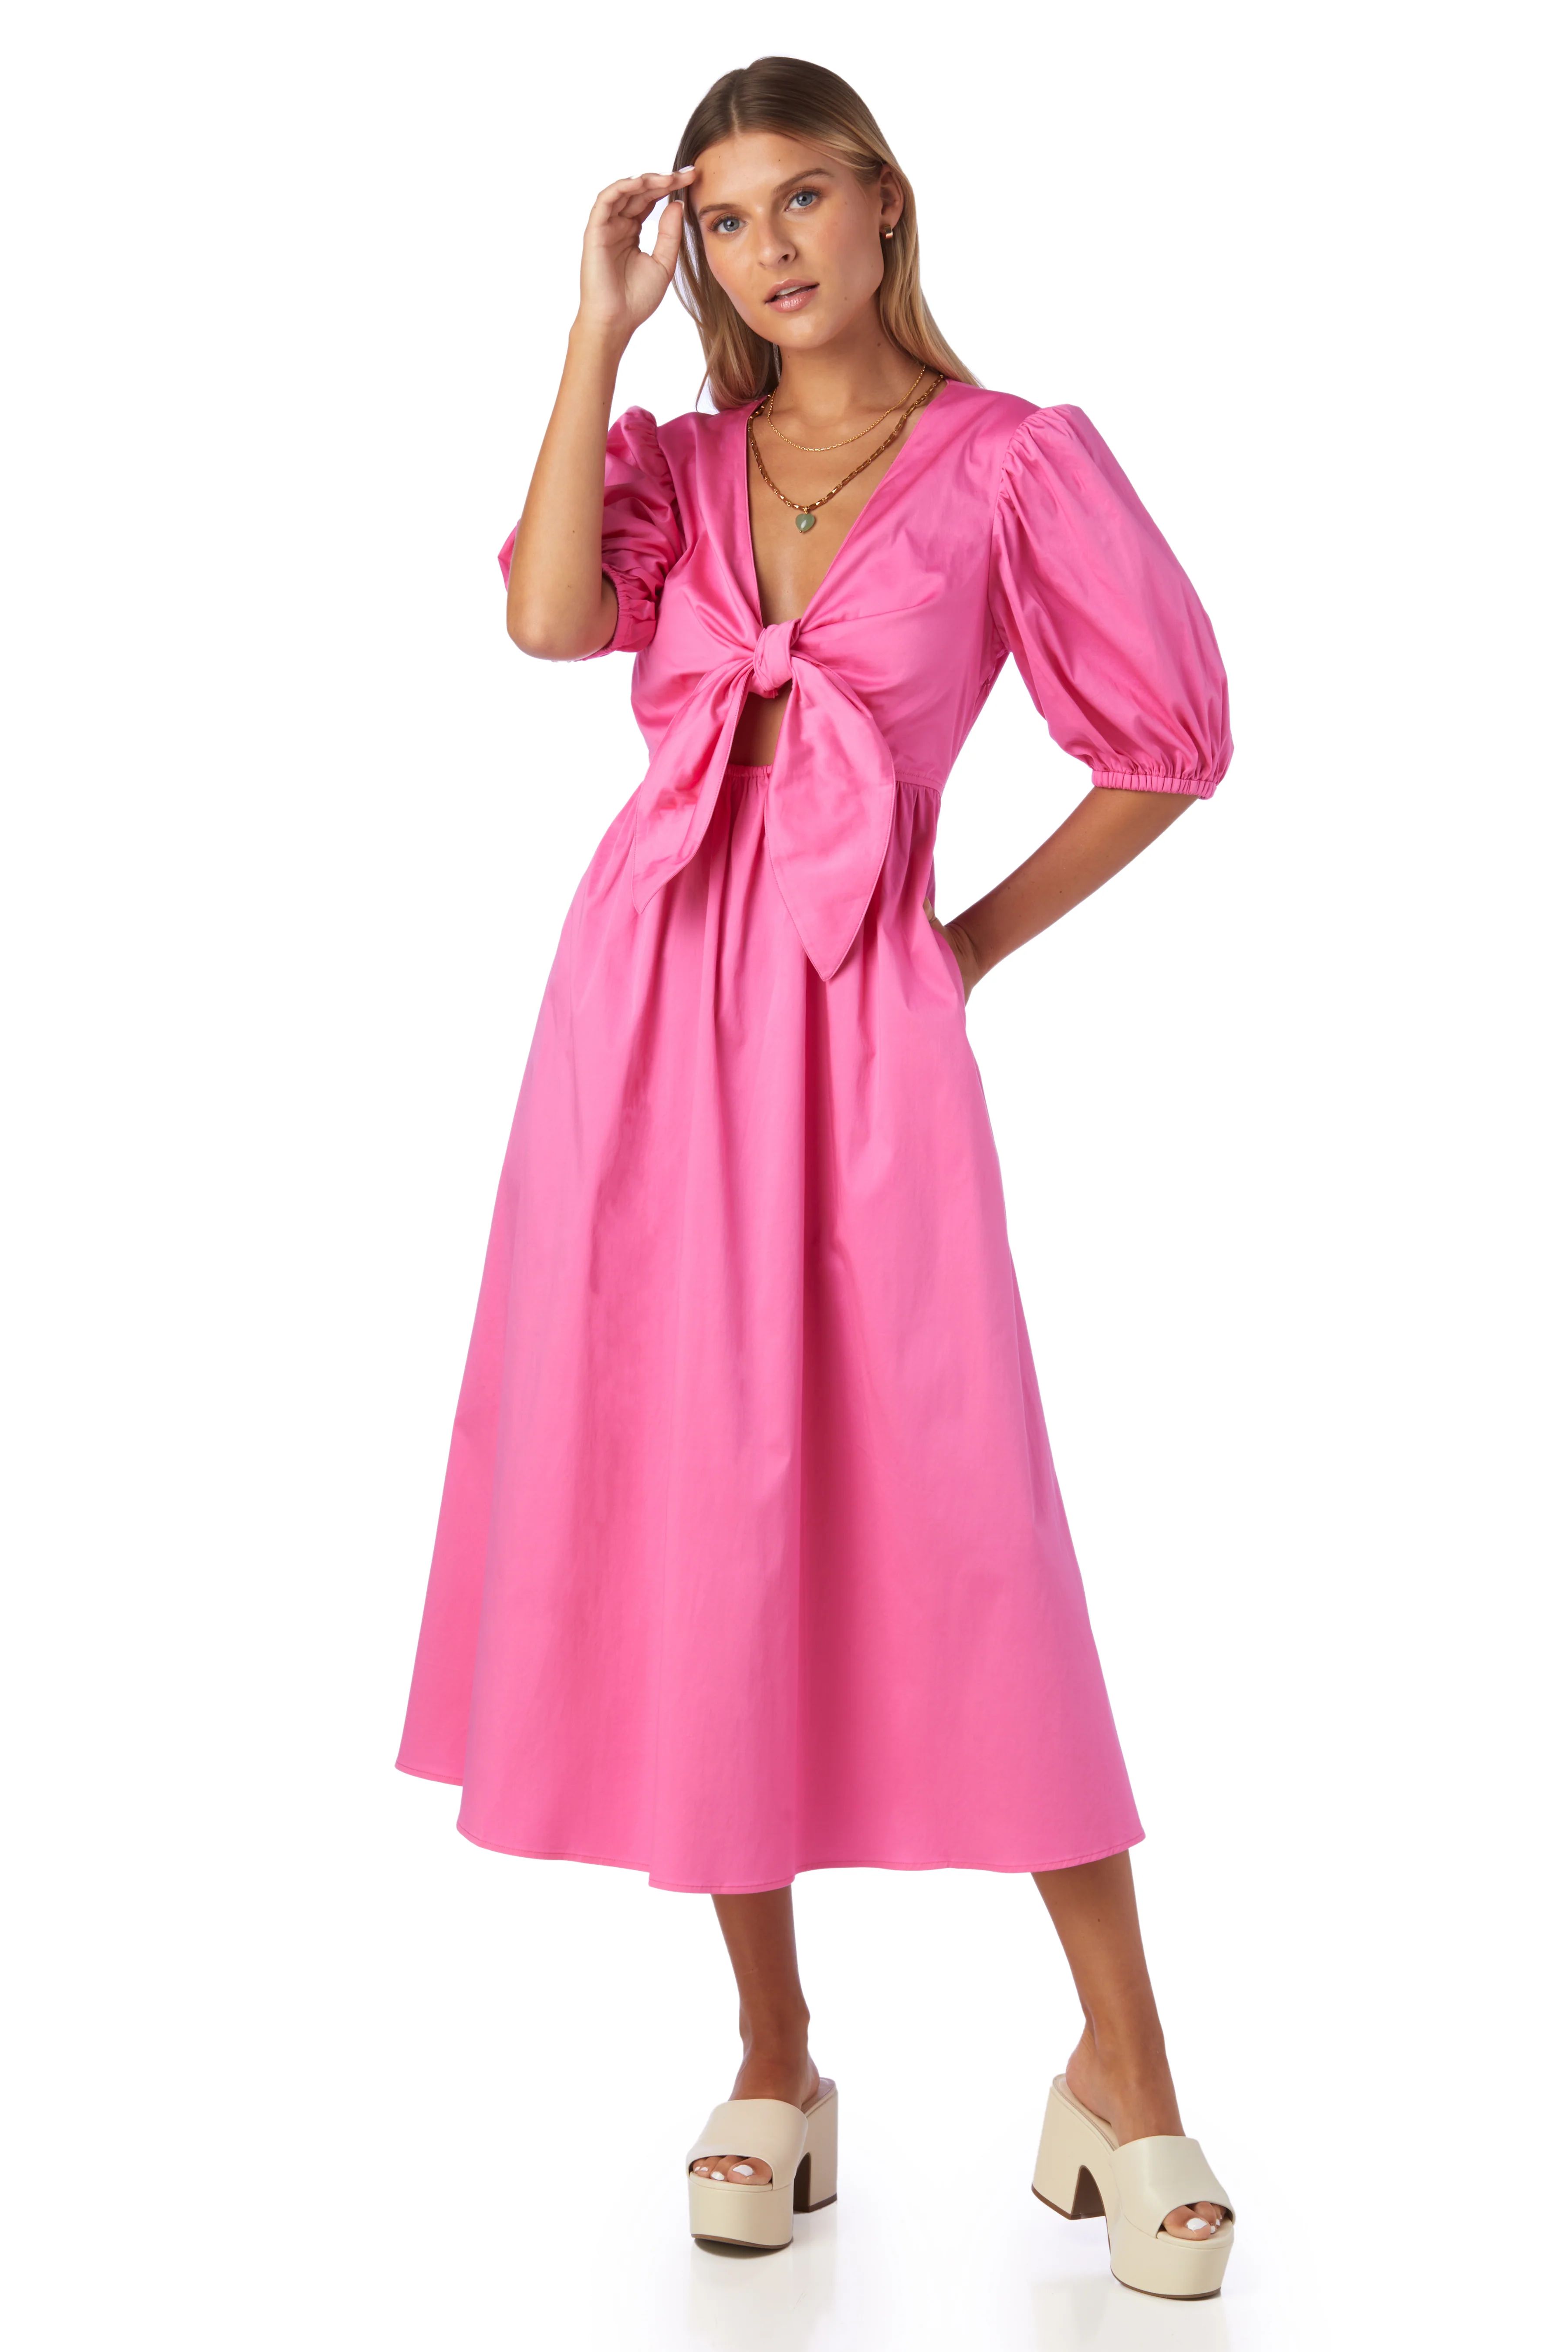 Emilie Dress in Tickled Pink - CROSBY by Mollie Burch | CROSBY by Mollie Burch